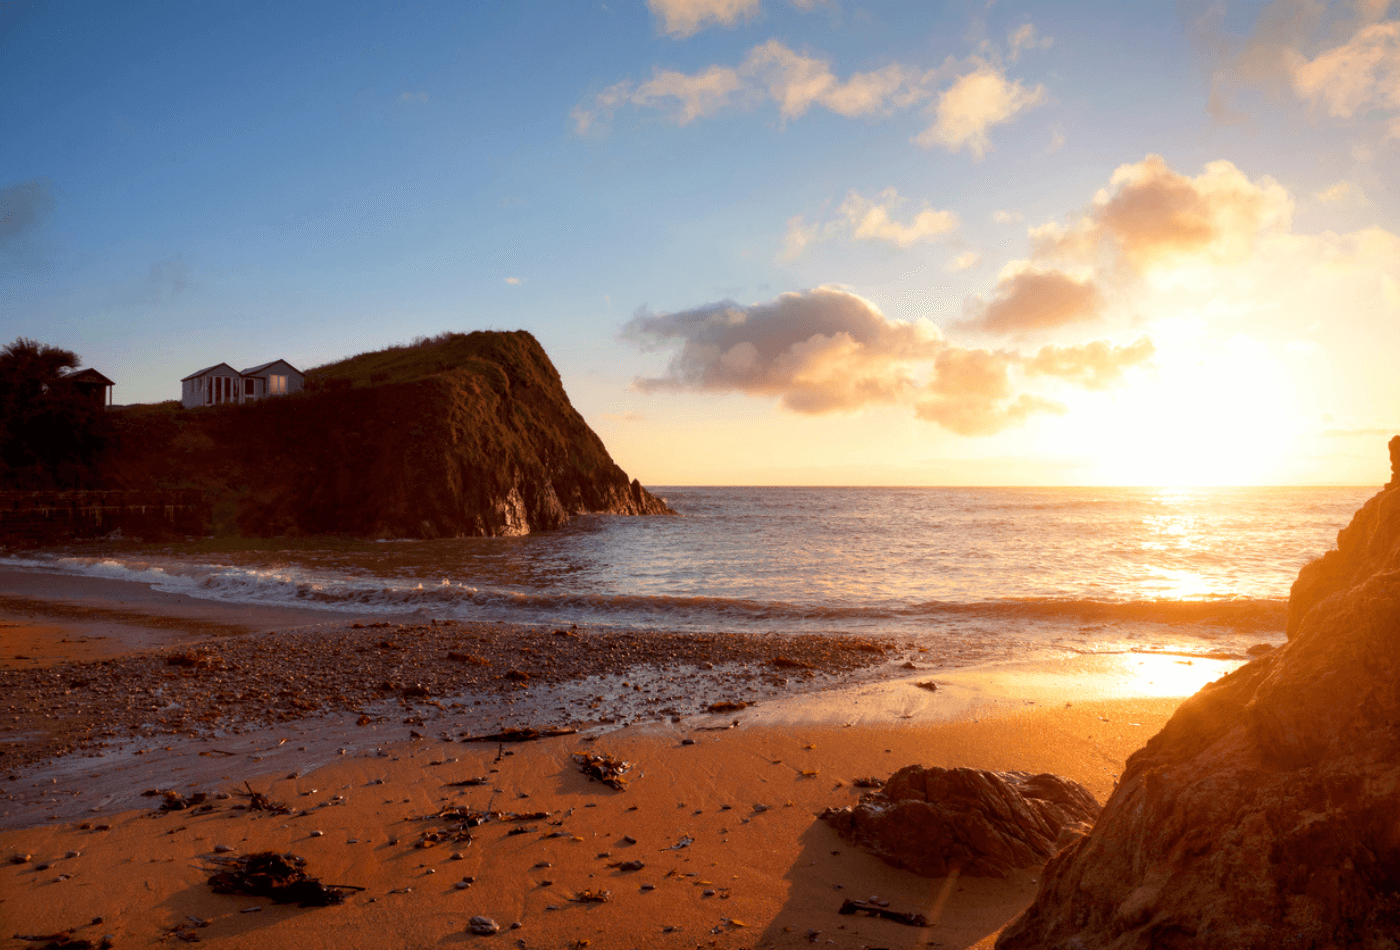 Beach huts on the cliff tops with the sun setting over Hope Cove, Devon, England.